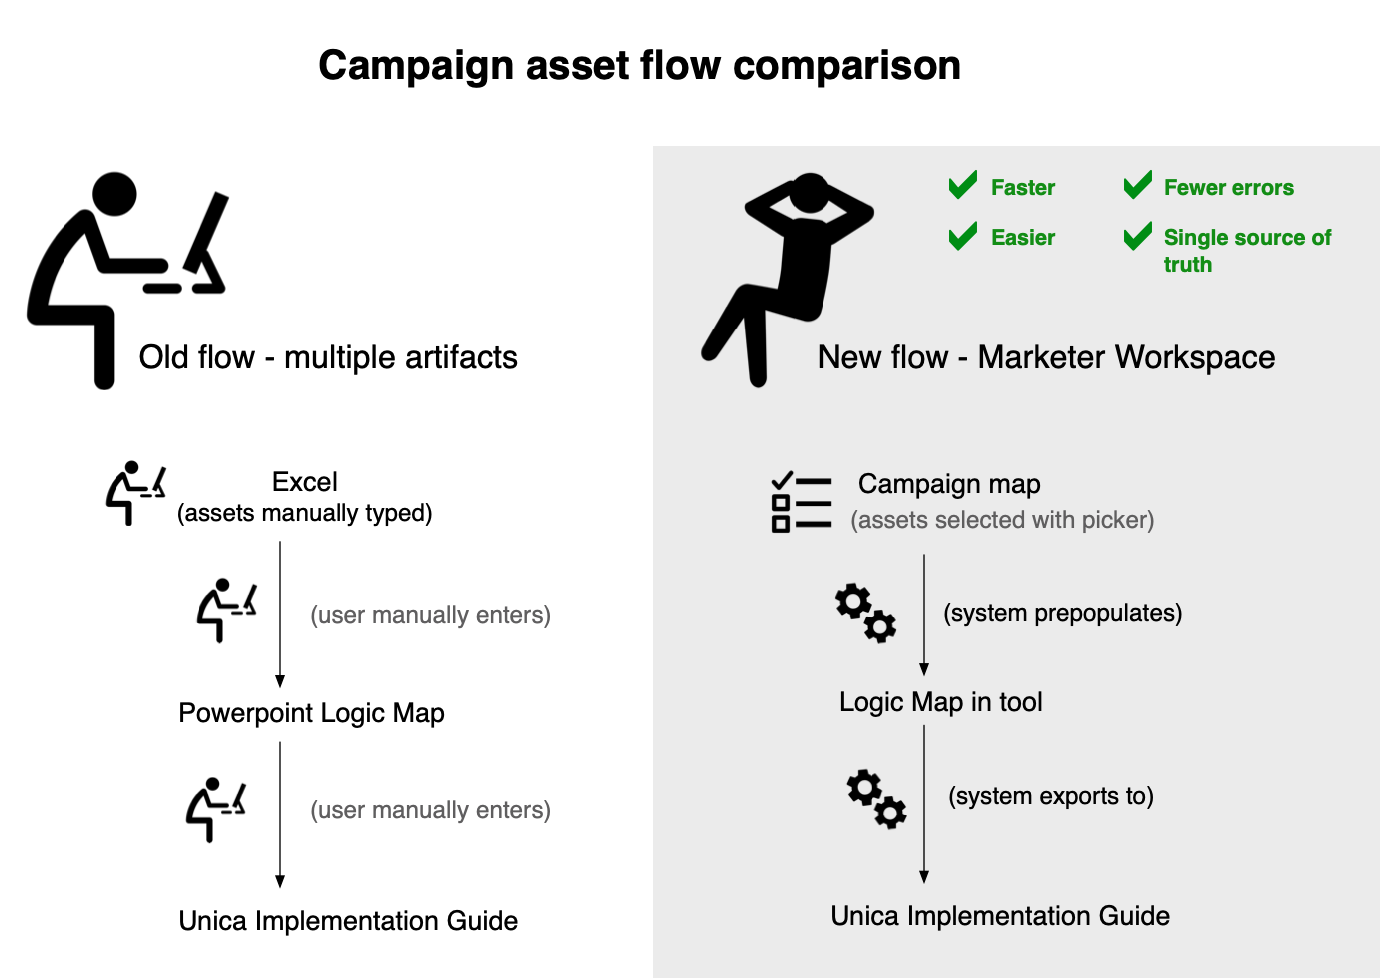 graphic showing the benefits of automating the flow of assets from the Marketer Workspace Campaign map, through the Logic View, and into the Unica Implementation Guide